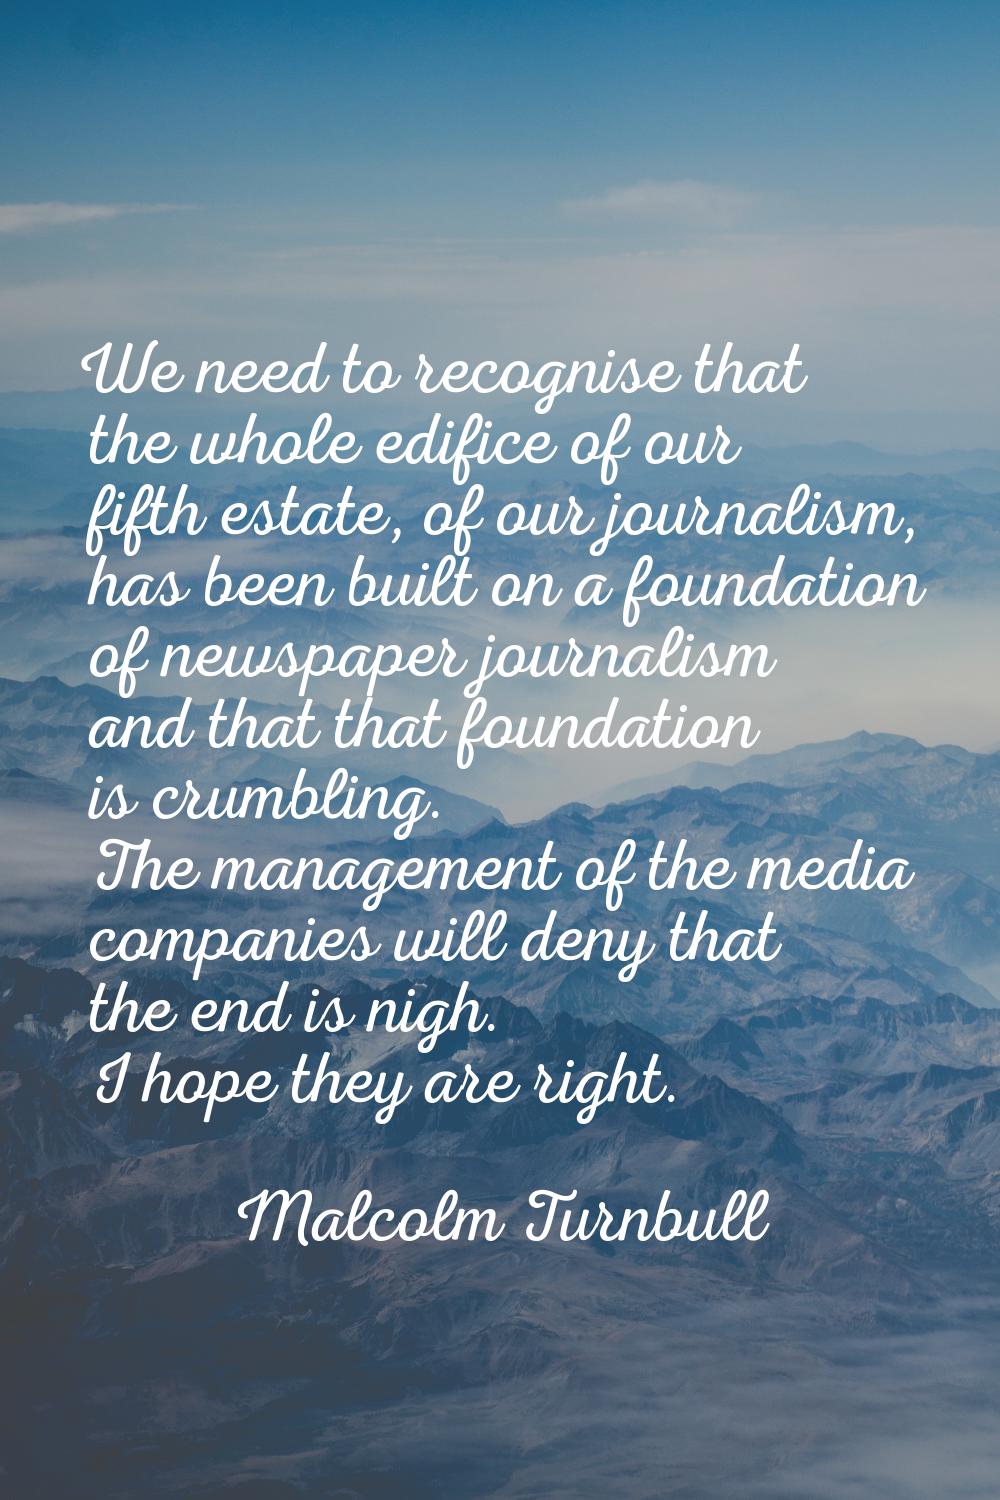 We need to recognise that the whole edifice of our fifth estate, of our journalism, has been built 